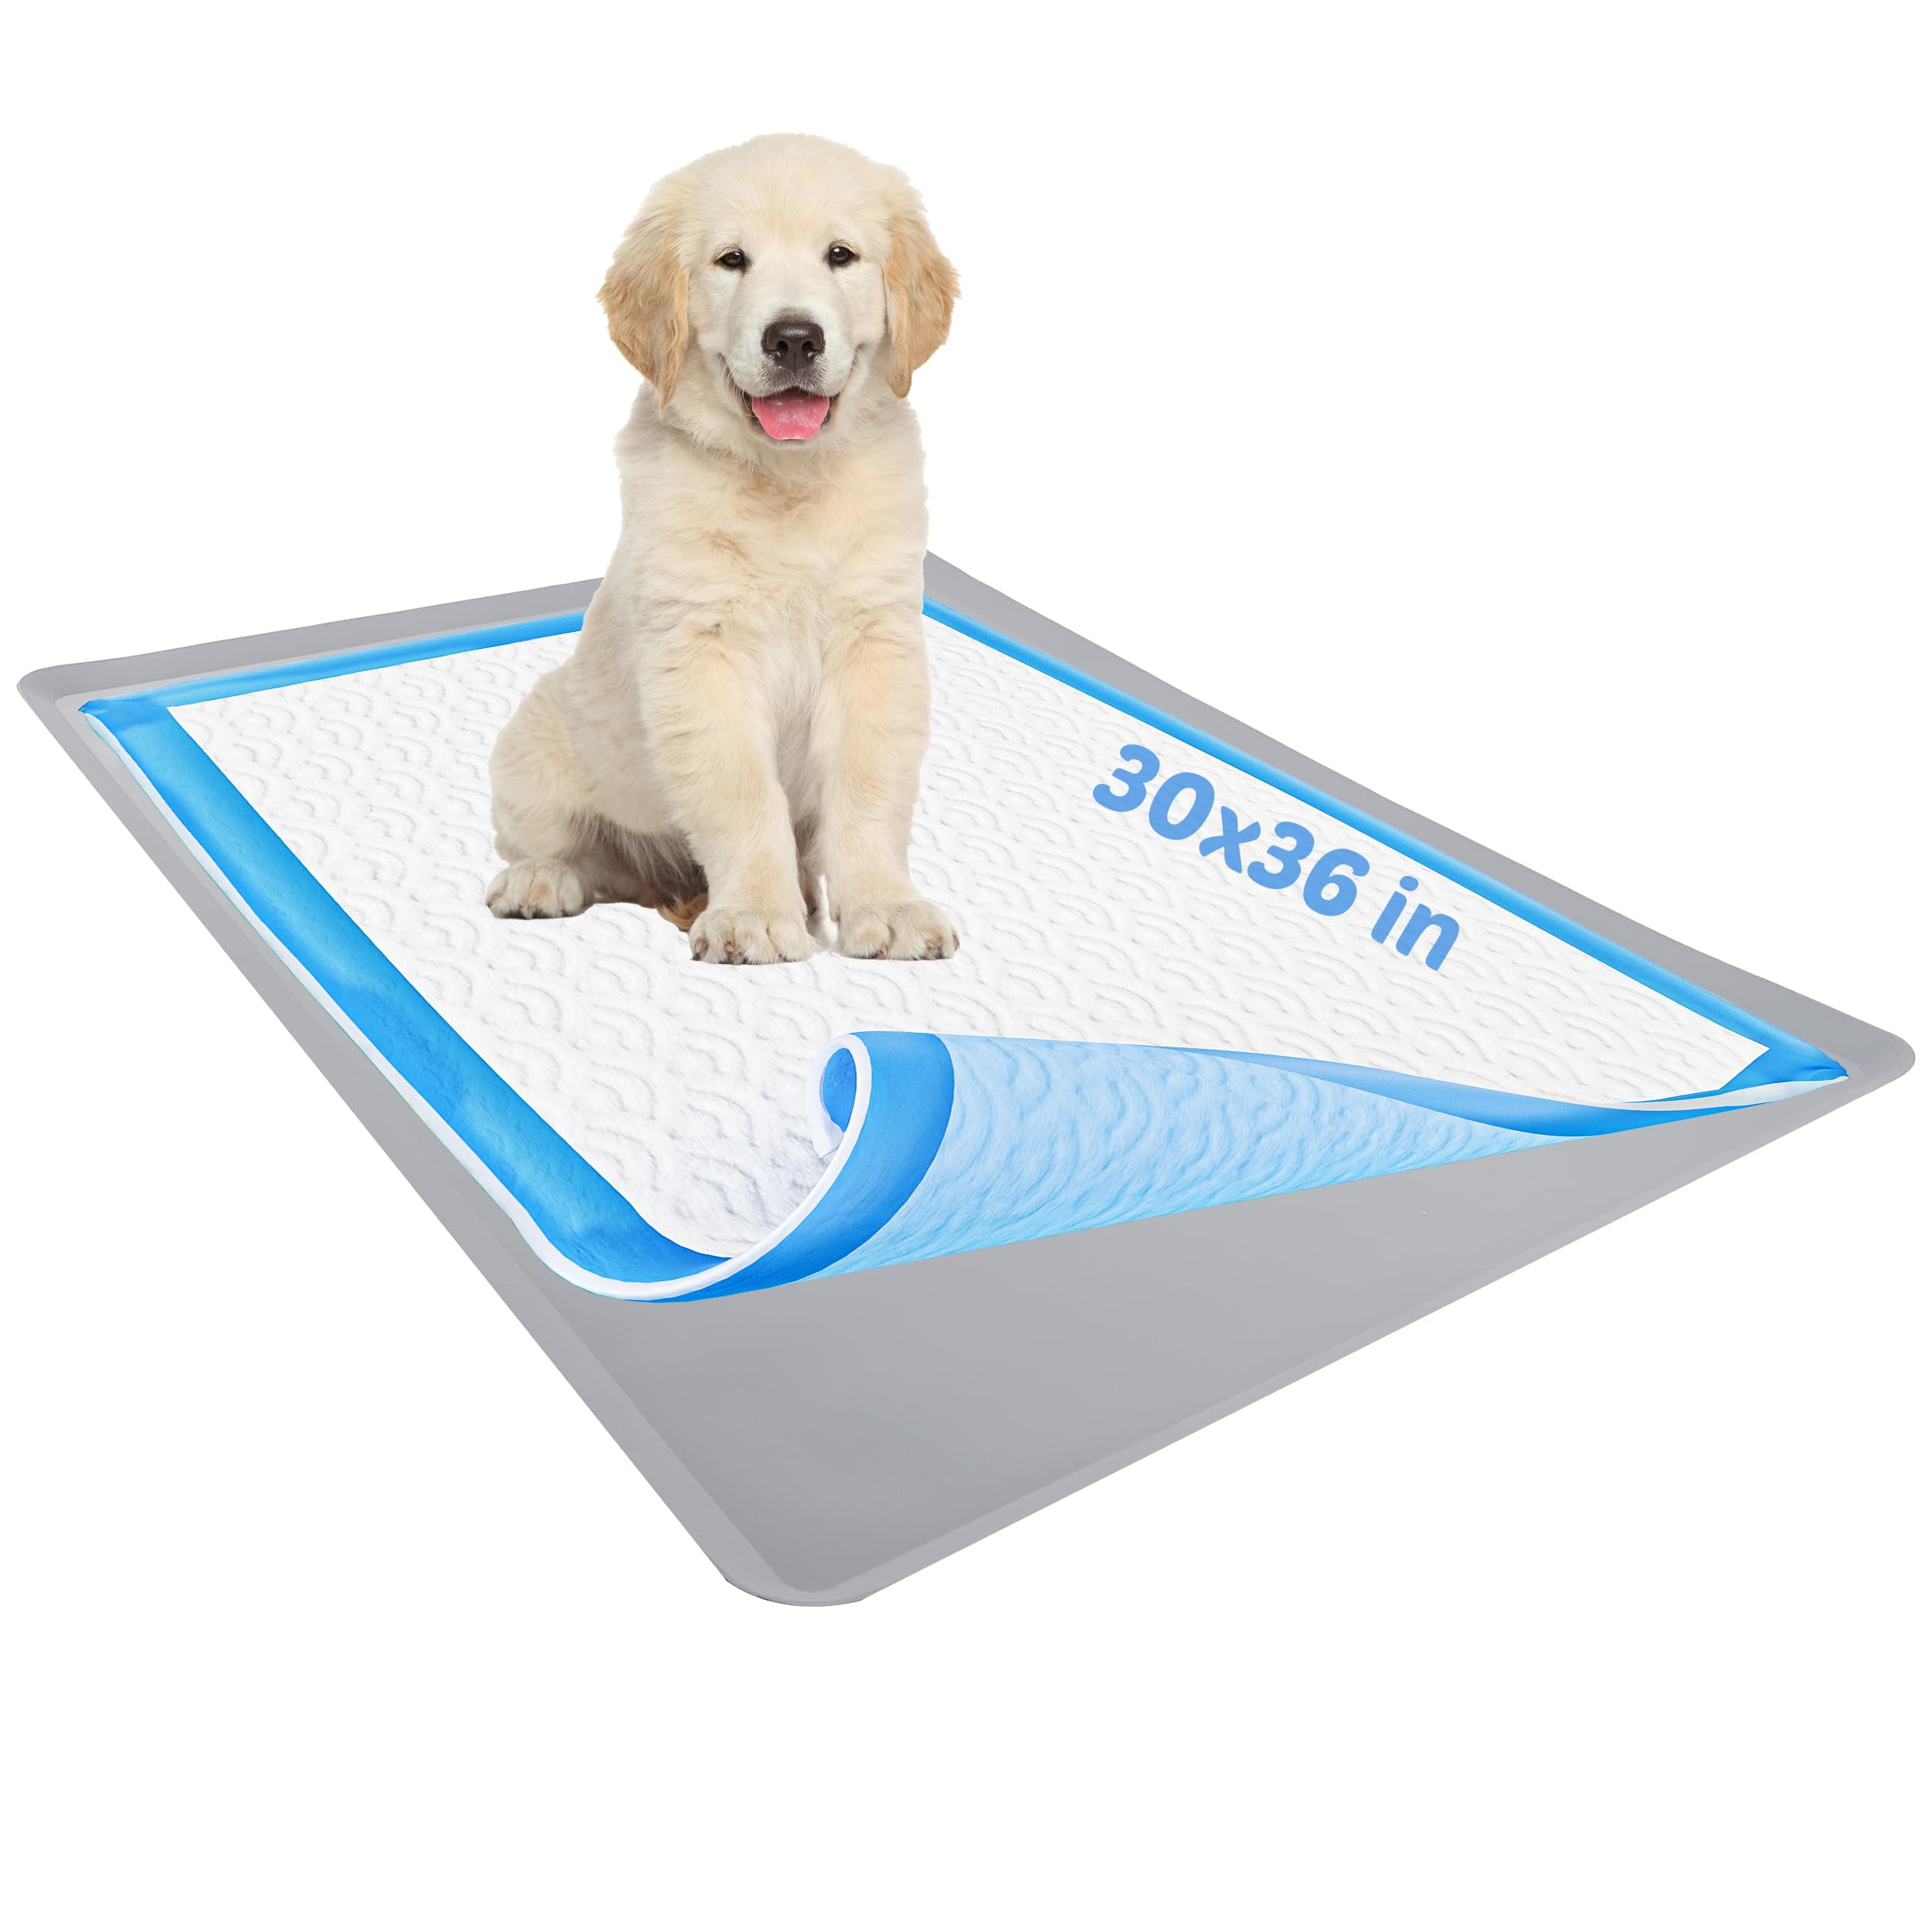 Skywin Dog Puppy Pad Holder Tray 24X24” (Grey) + 24x36” (Grey) - Silicone,  No Spill Pee Pad Holder for Dogs - Pee Pad Holder Works with Most Training